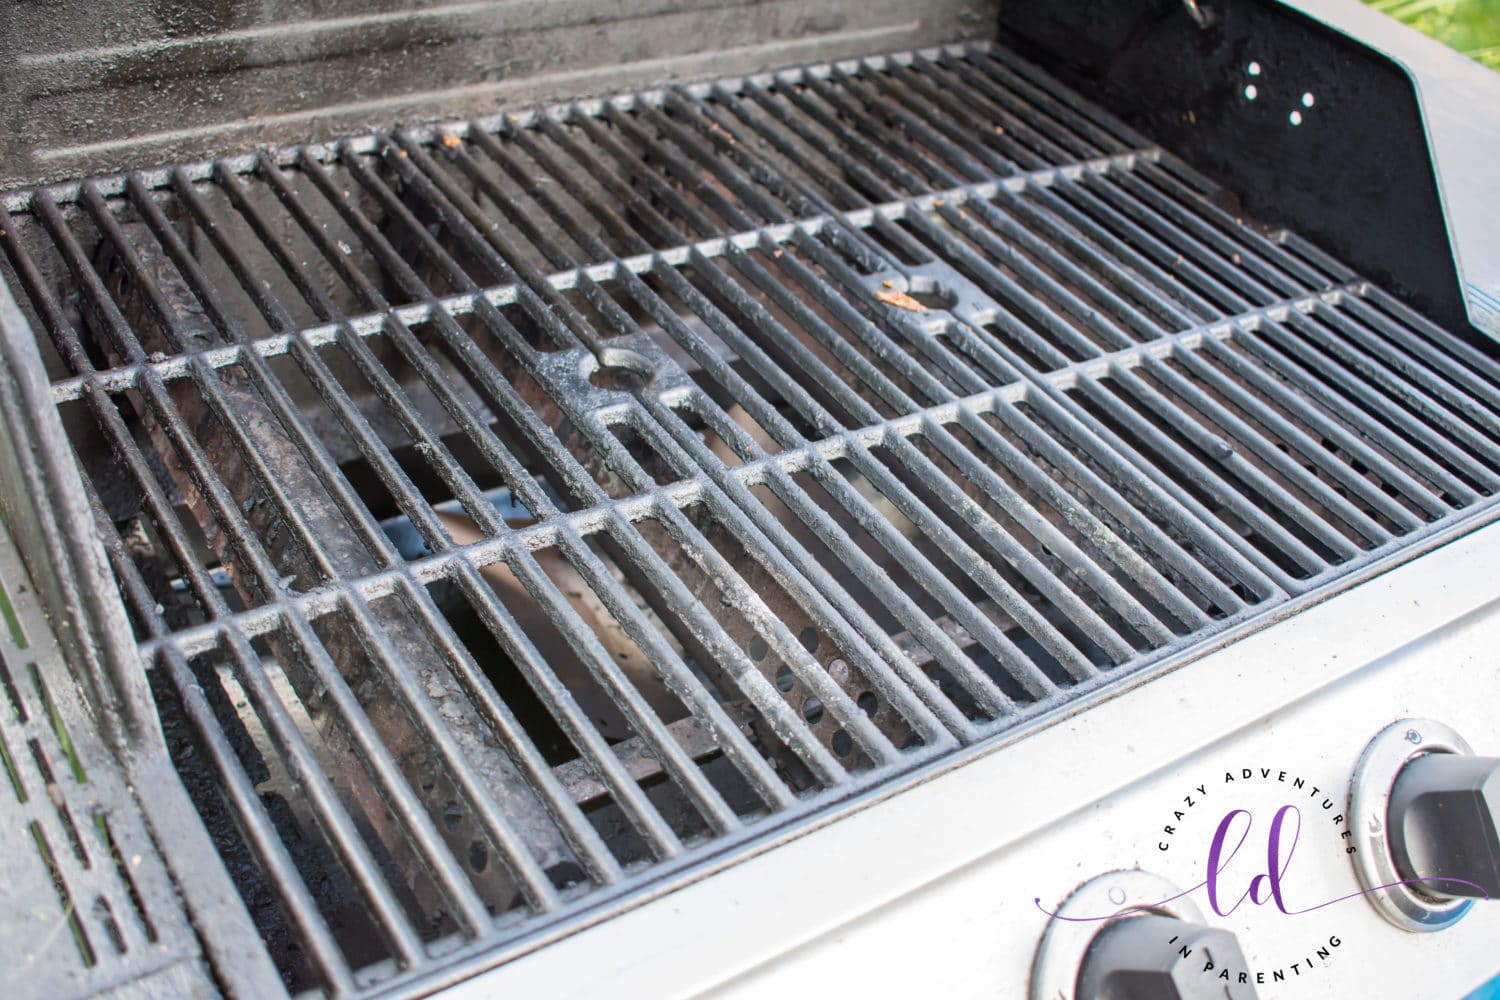 Dirty Grill Grates Before Using Goo Gone Grill and Grate Cleaner